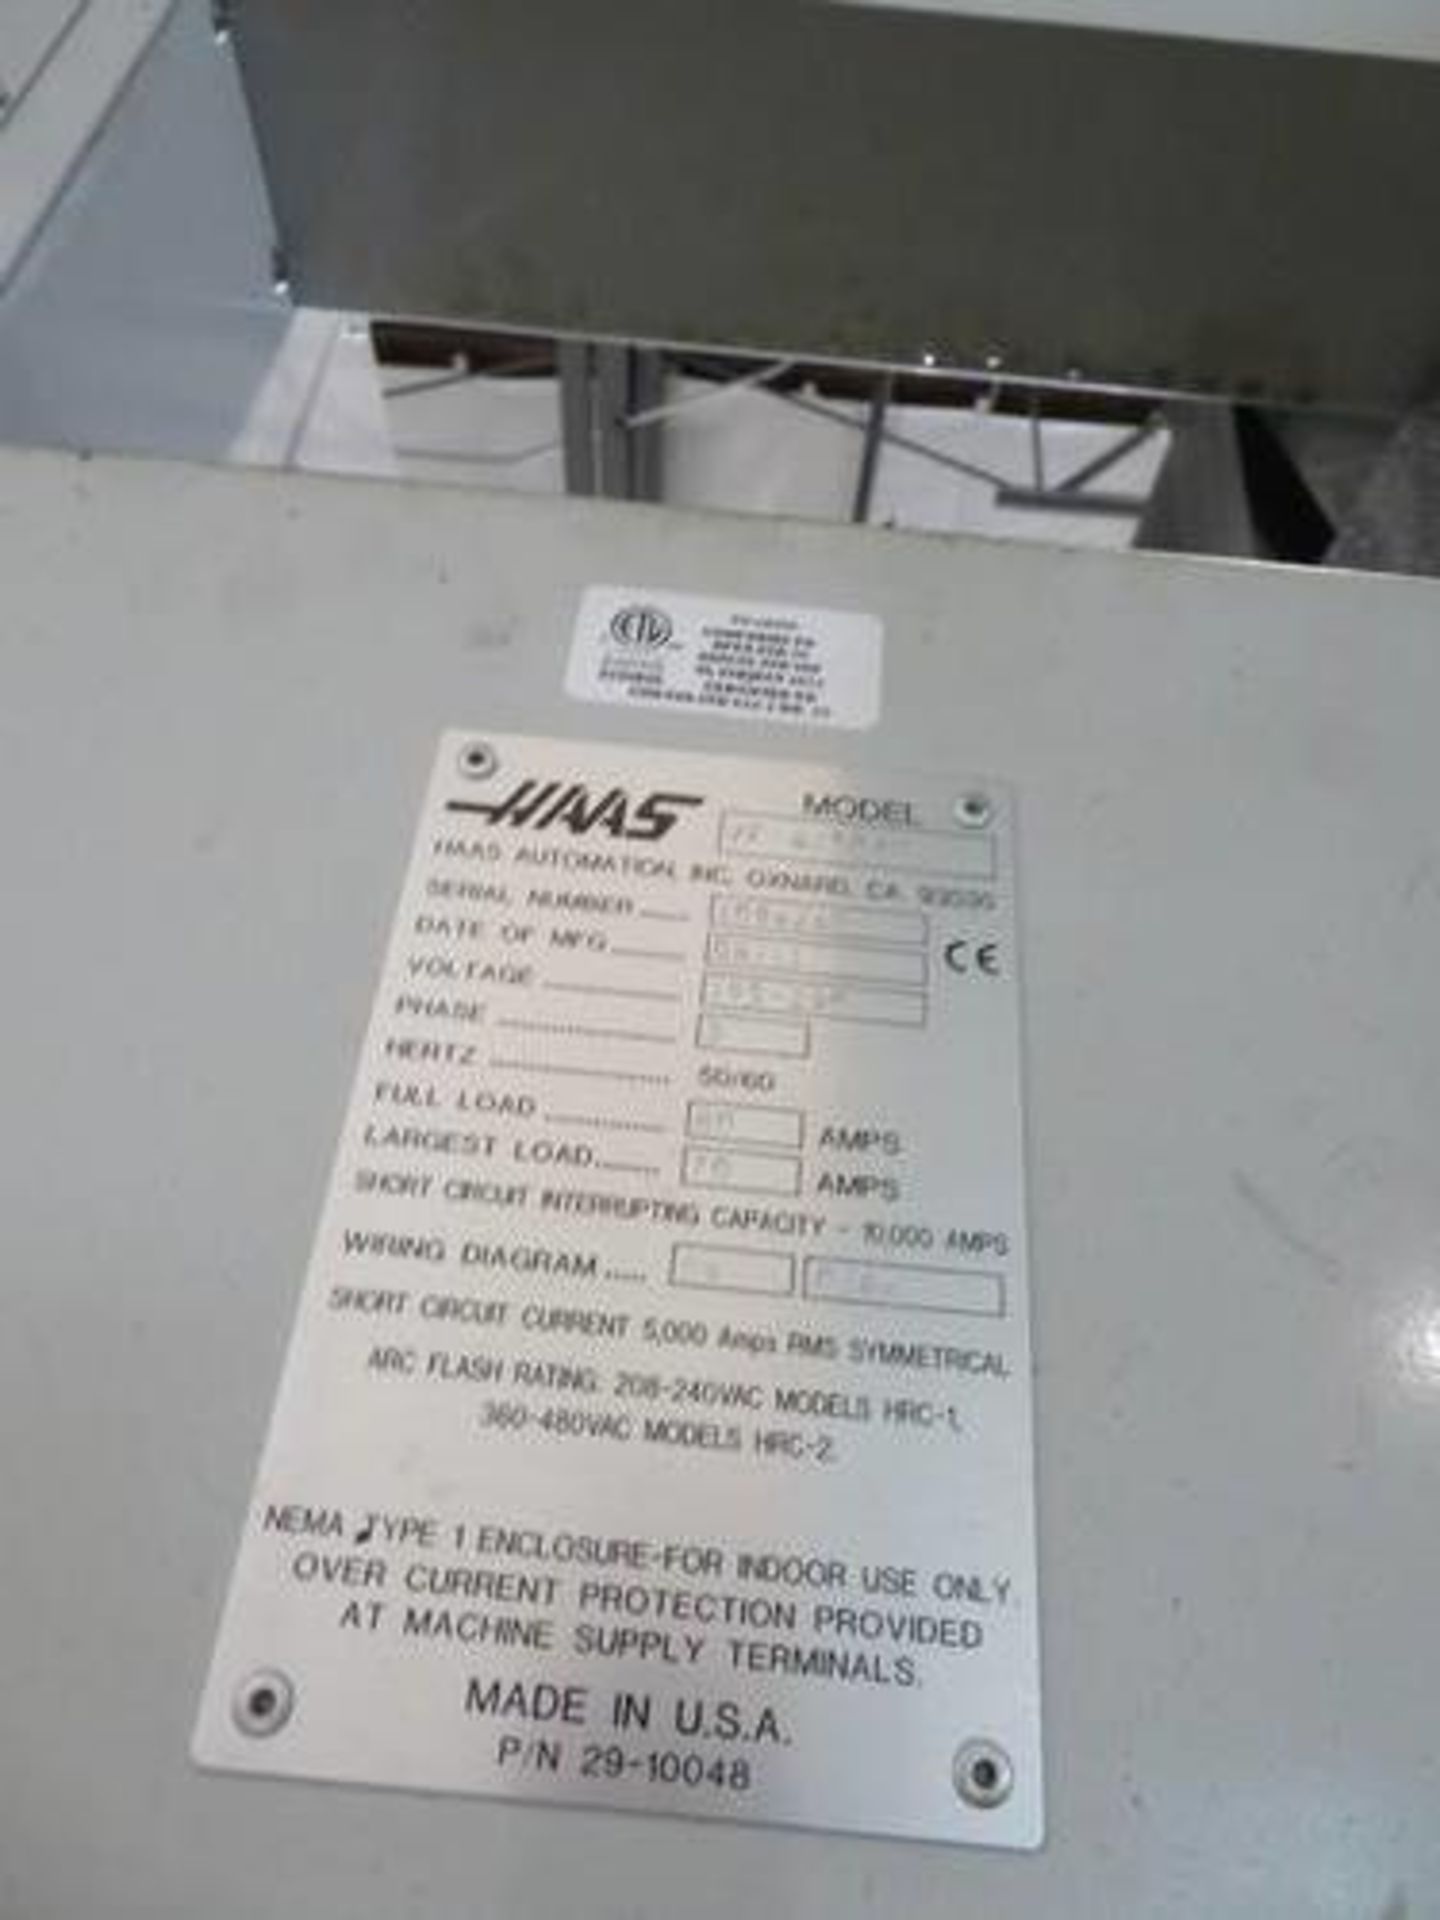 Haas TR310 5-Axis Trunion AND Haas VF6TR, 5-Axis V.M.C. Haas Control, 64" x 32" x 40" - Image 10 of 10